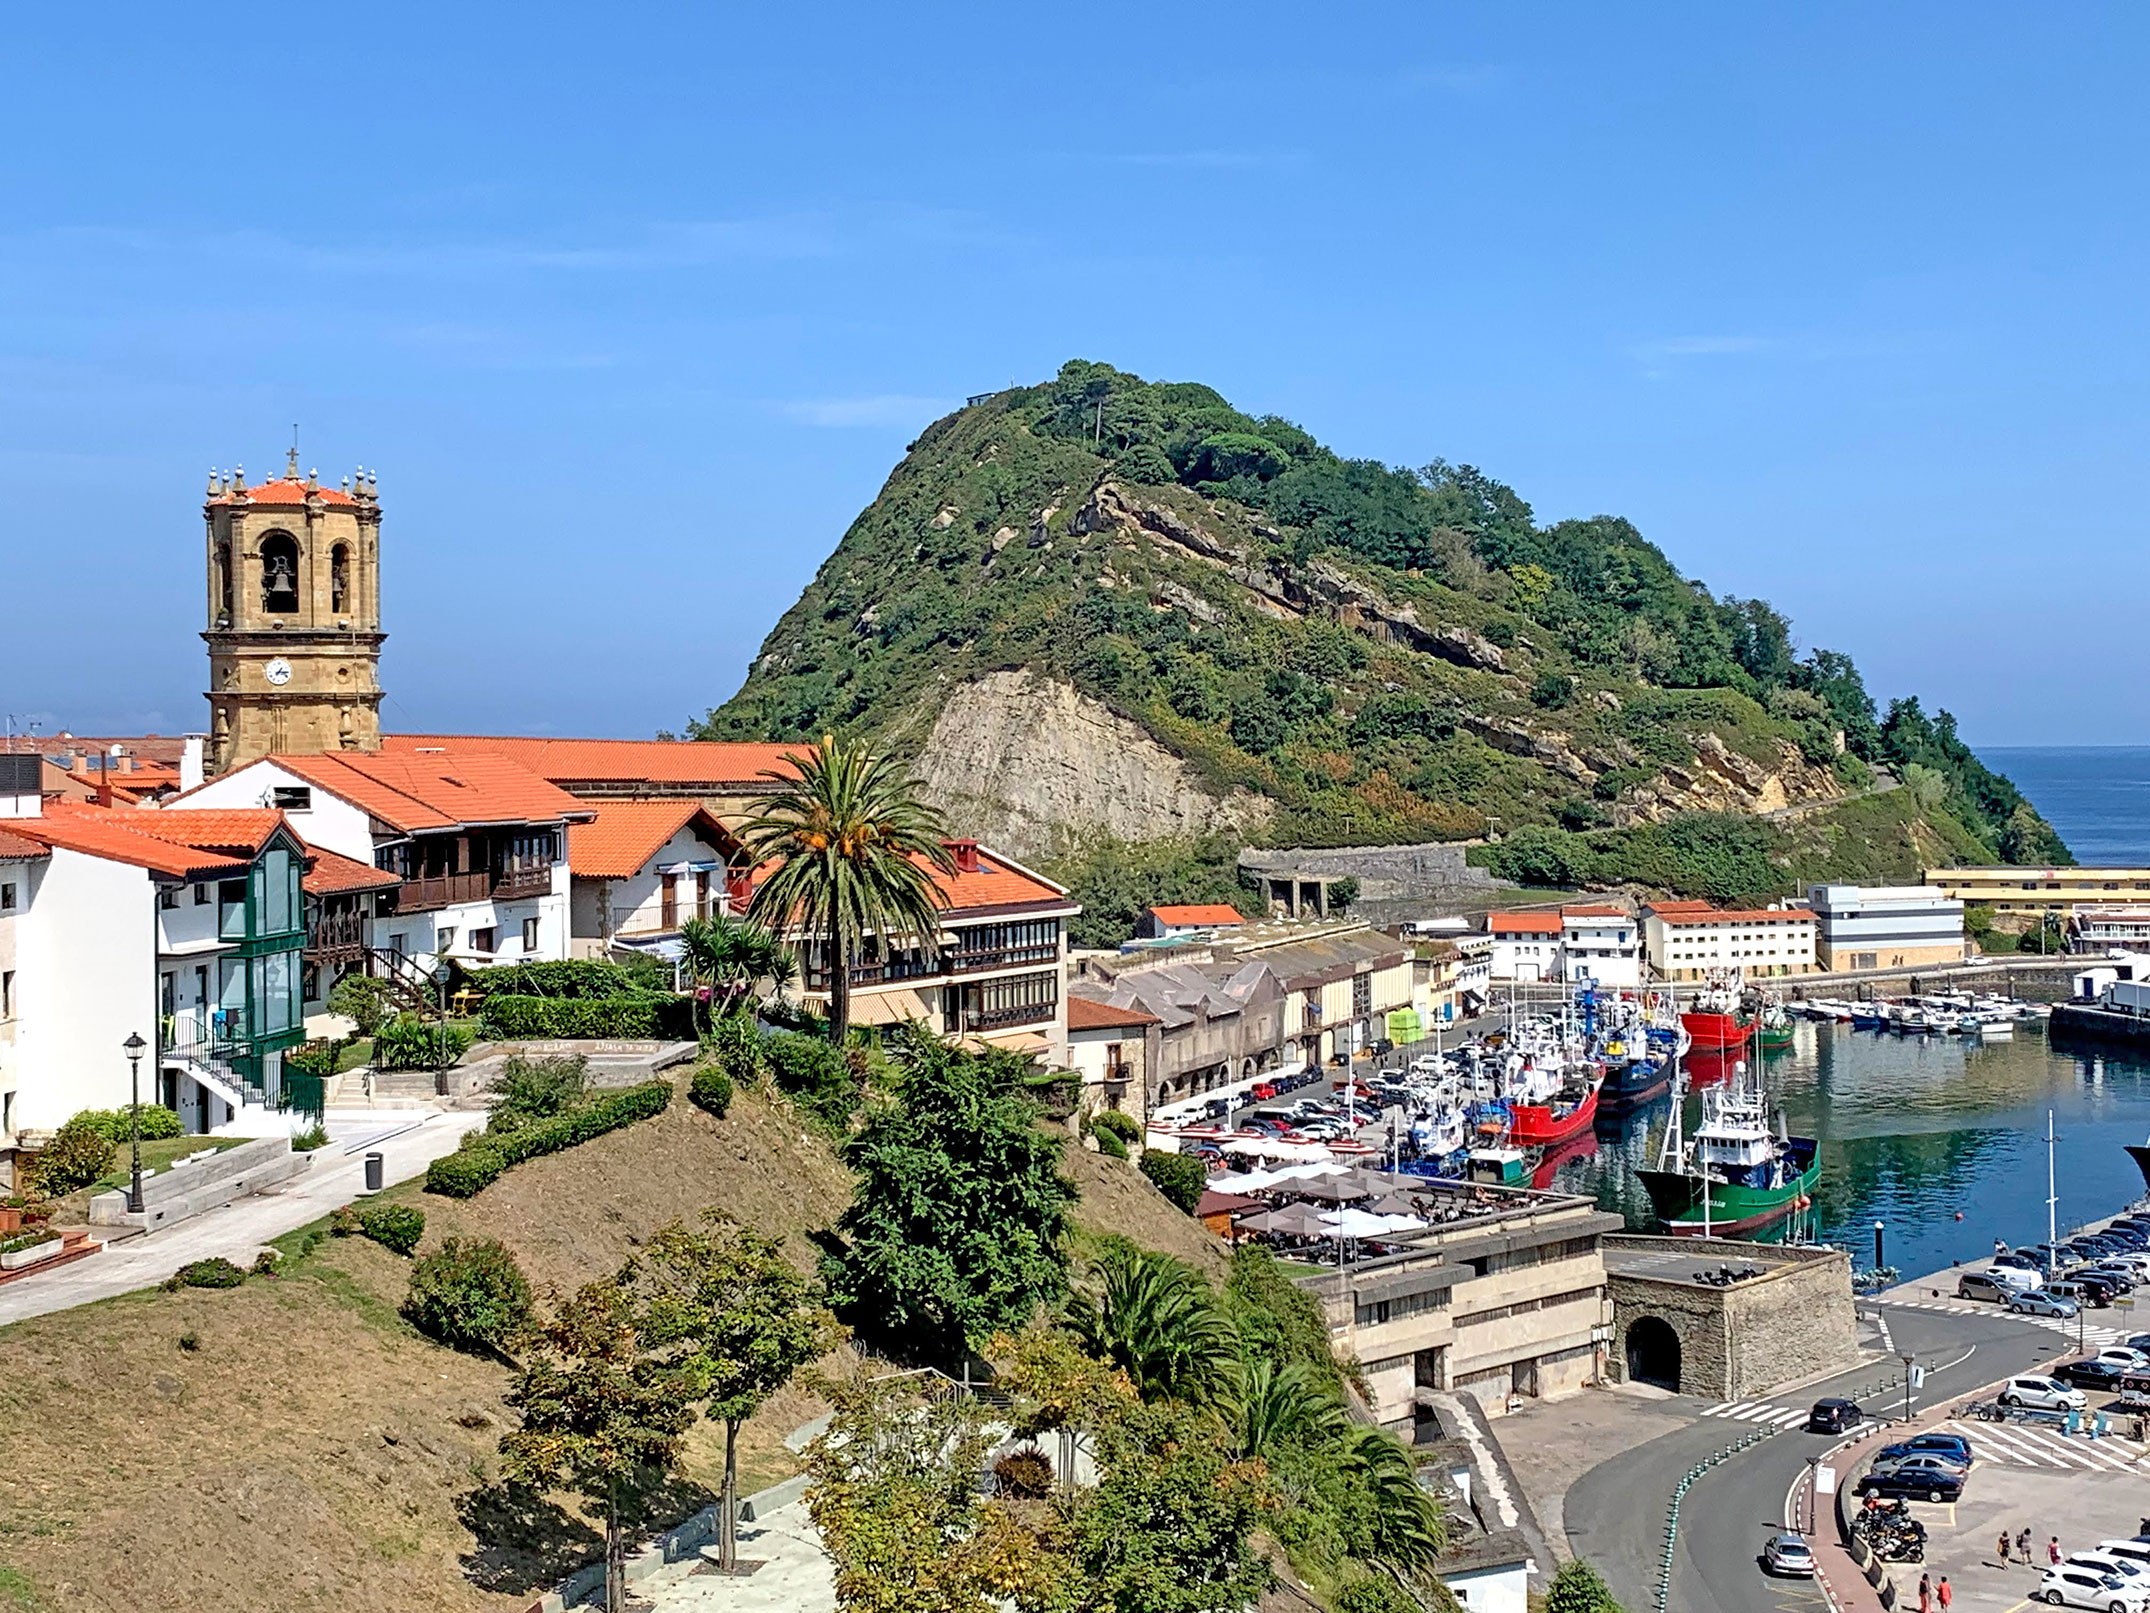 Getaria, known as "the mouse" is one of the loveliest Basque towns | CÚRATE Trips